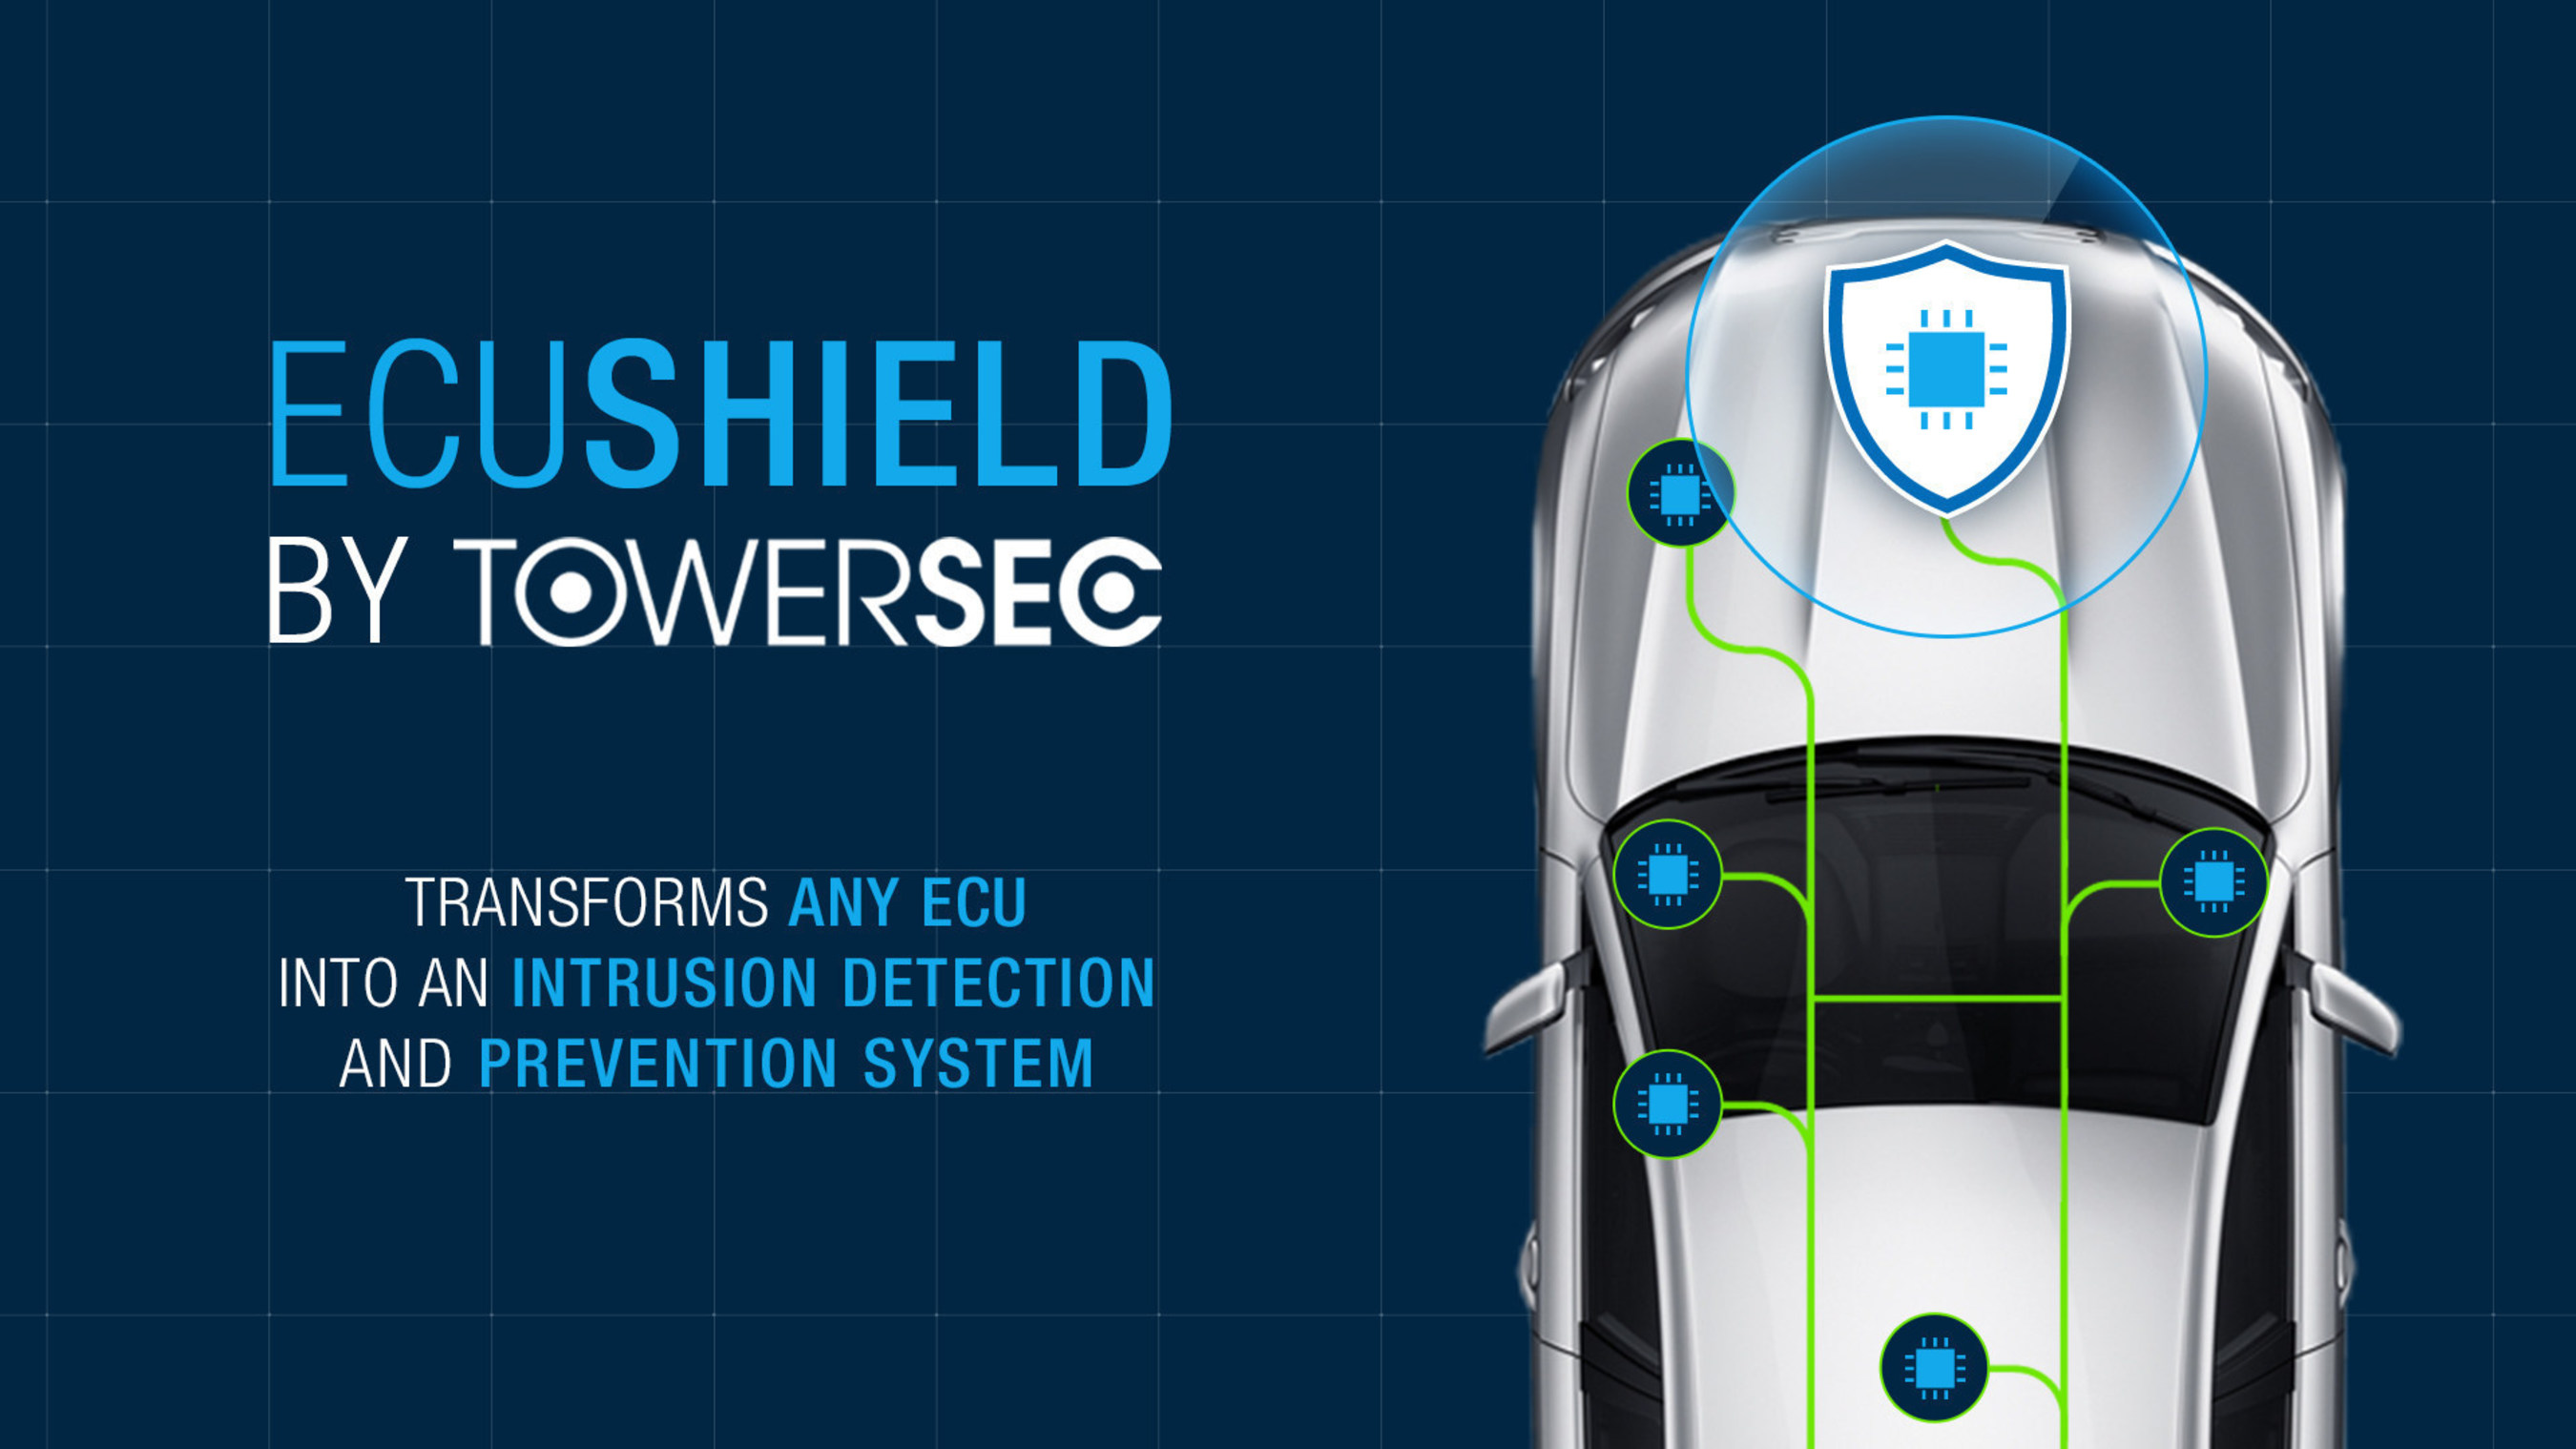 ECUSHIELD by TowerSec  For more information: www.tower-sec.com